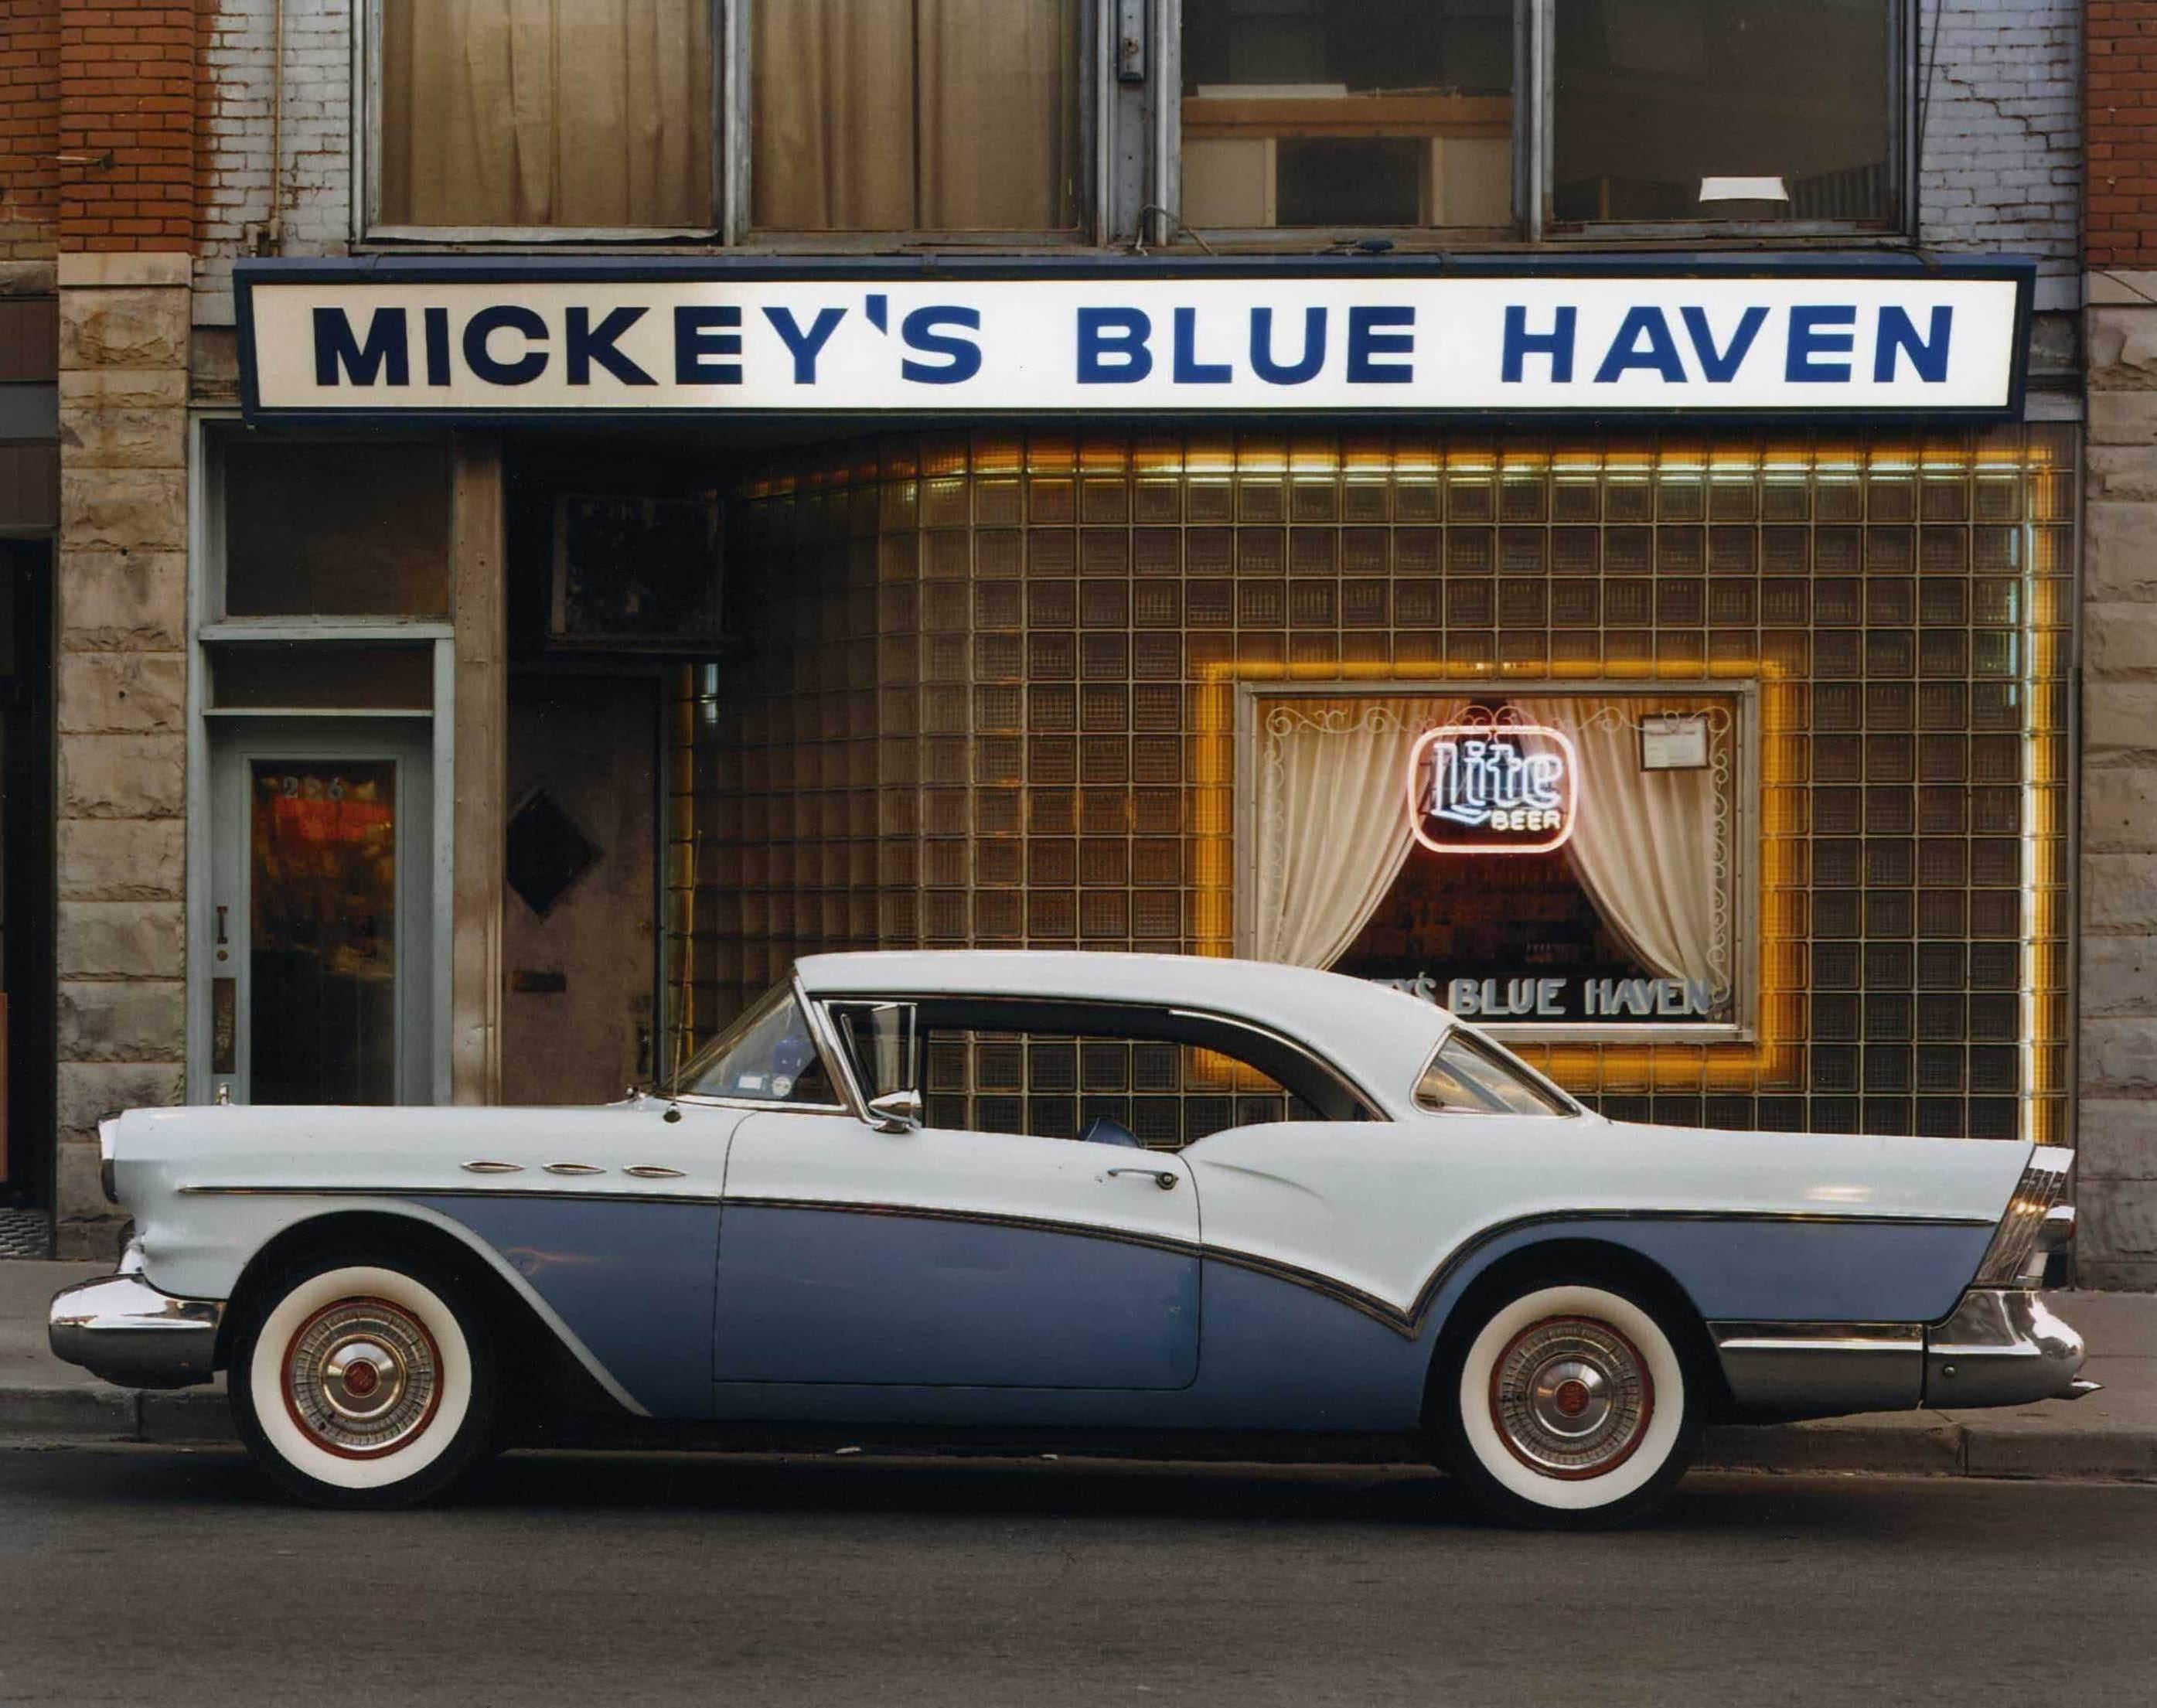 Bruce Wrighton Color Photograph - 1957 Buick Special Riviera Coupe (Mickey's Blue Haven), Johnson City, NY